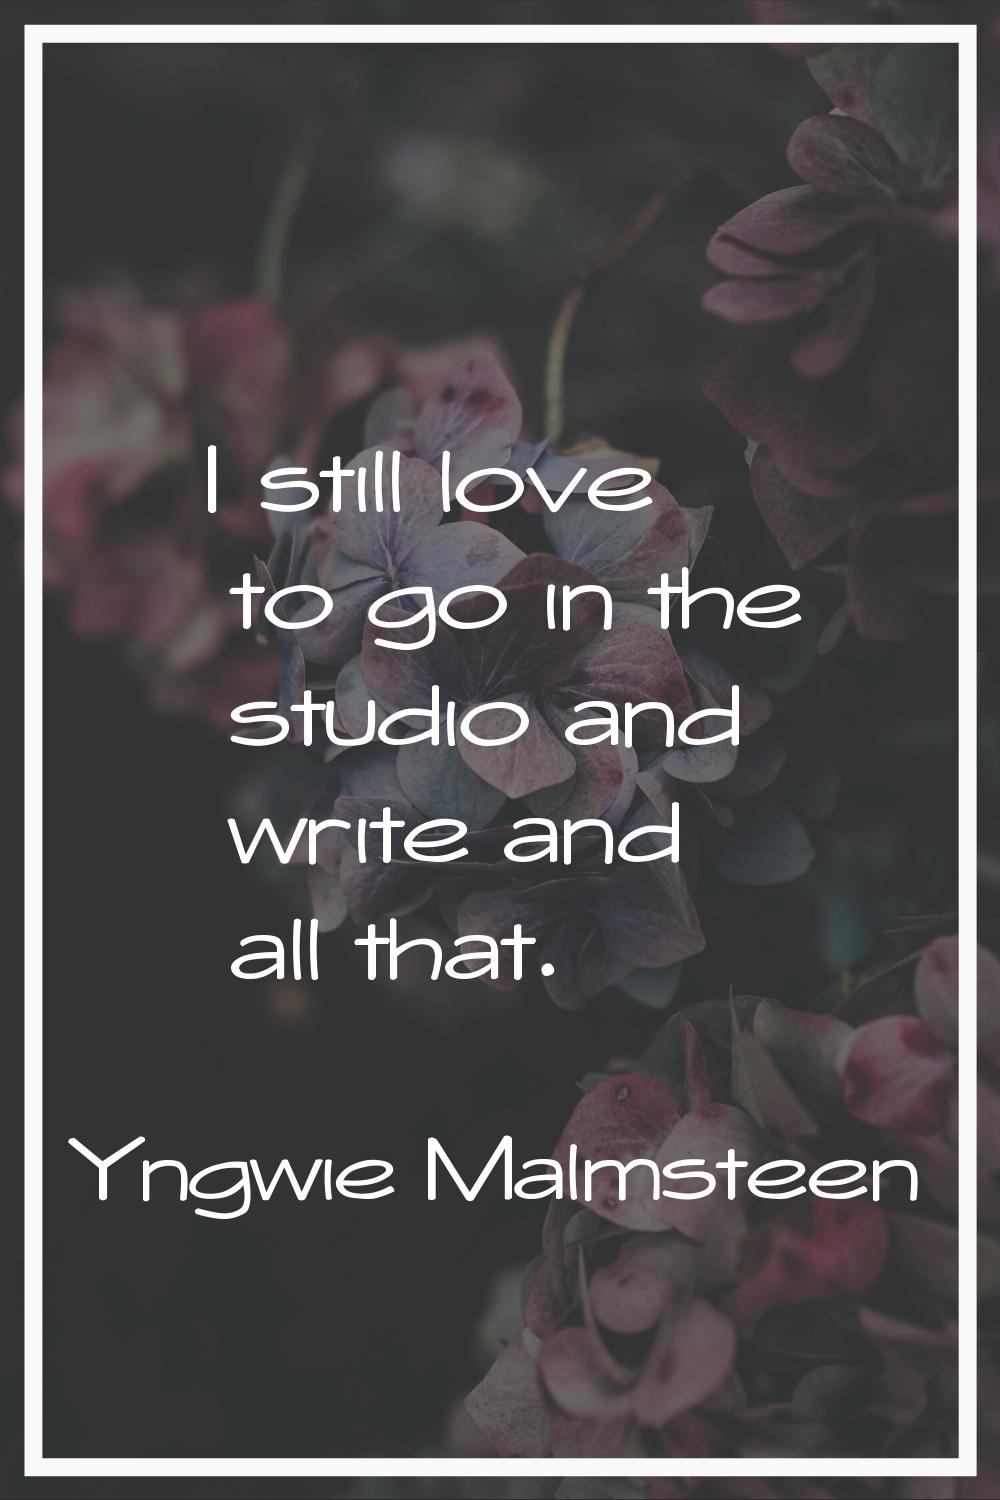 I still love to go in the studio and write and all that.